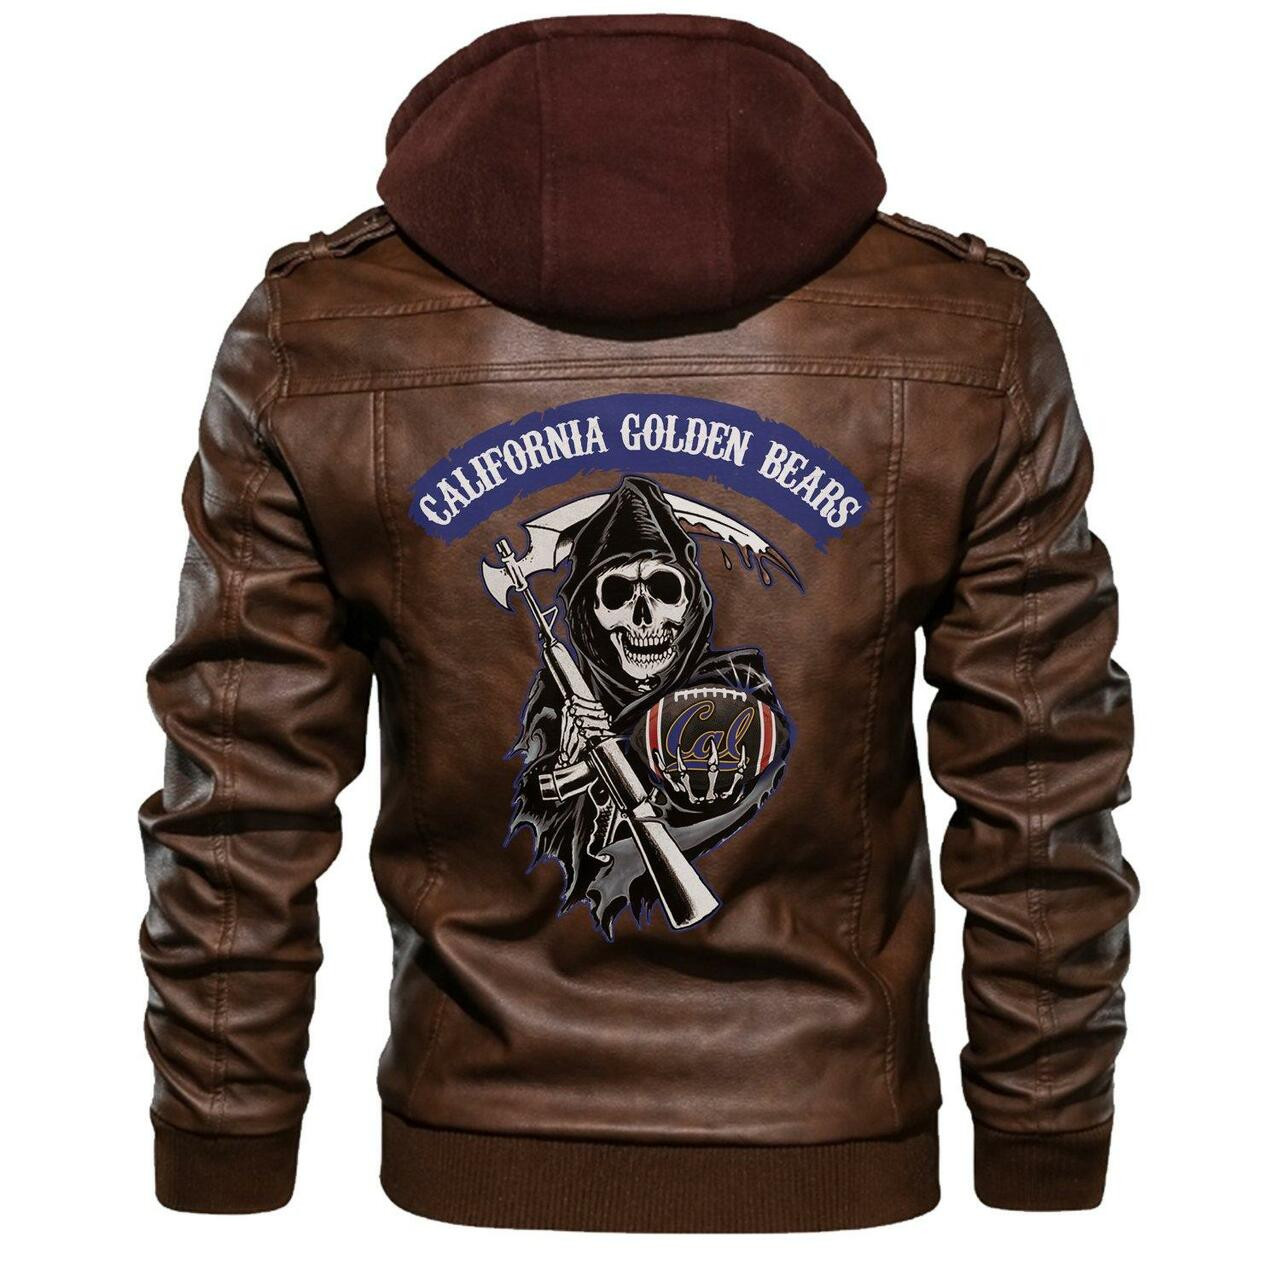 Check out and find the right leather jacket below 151